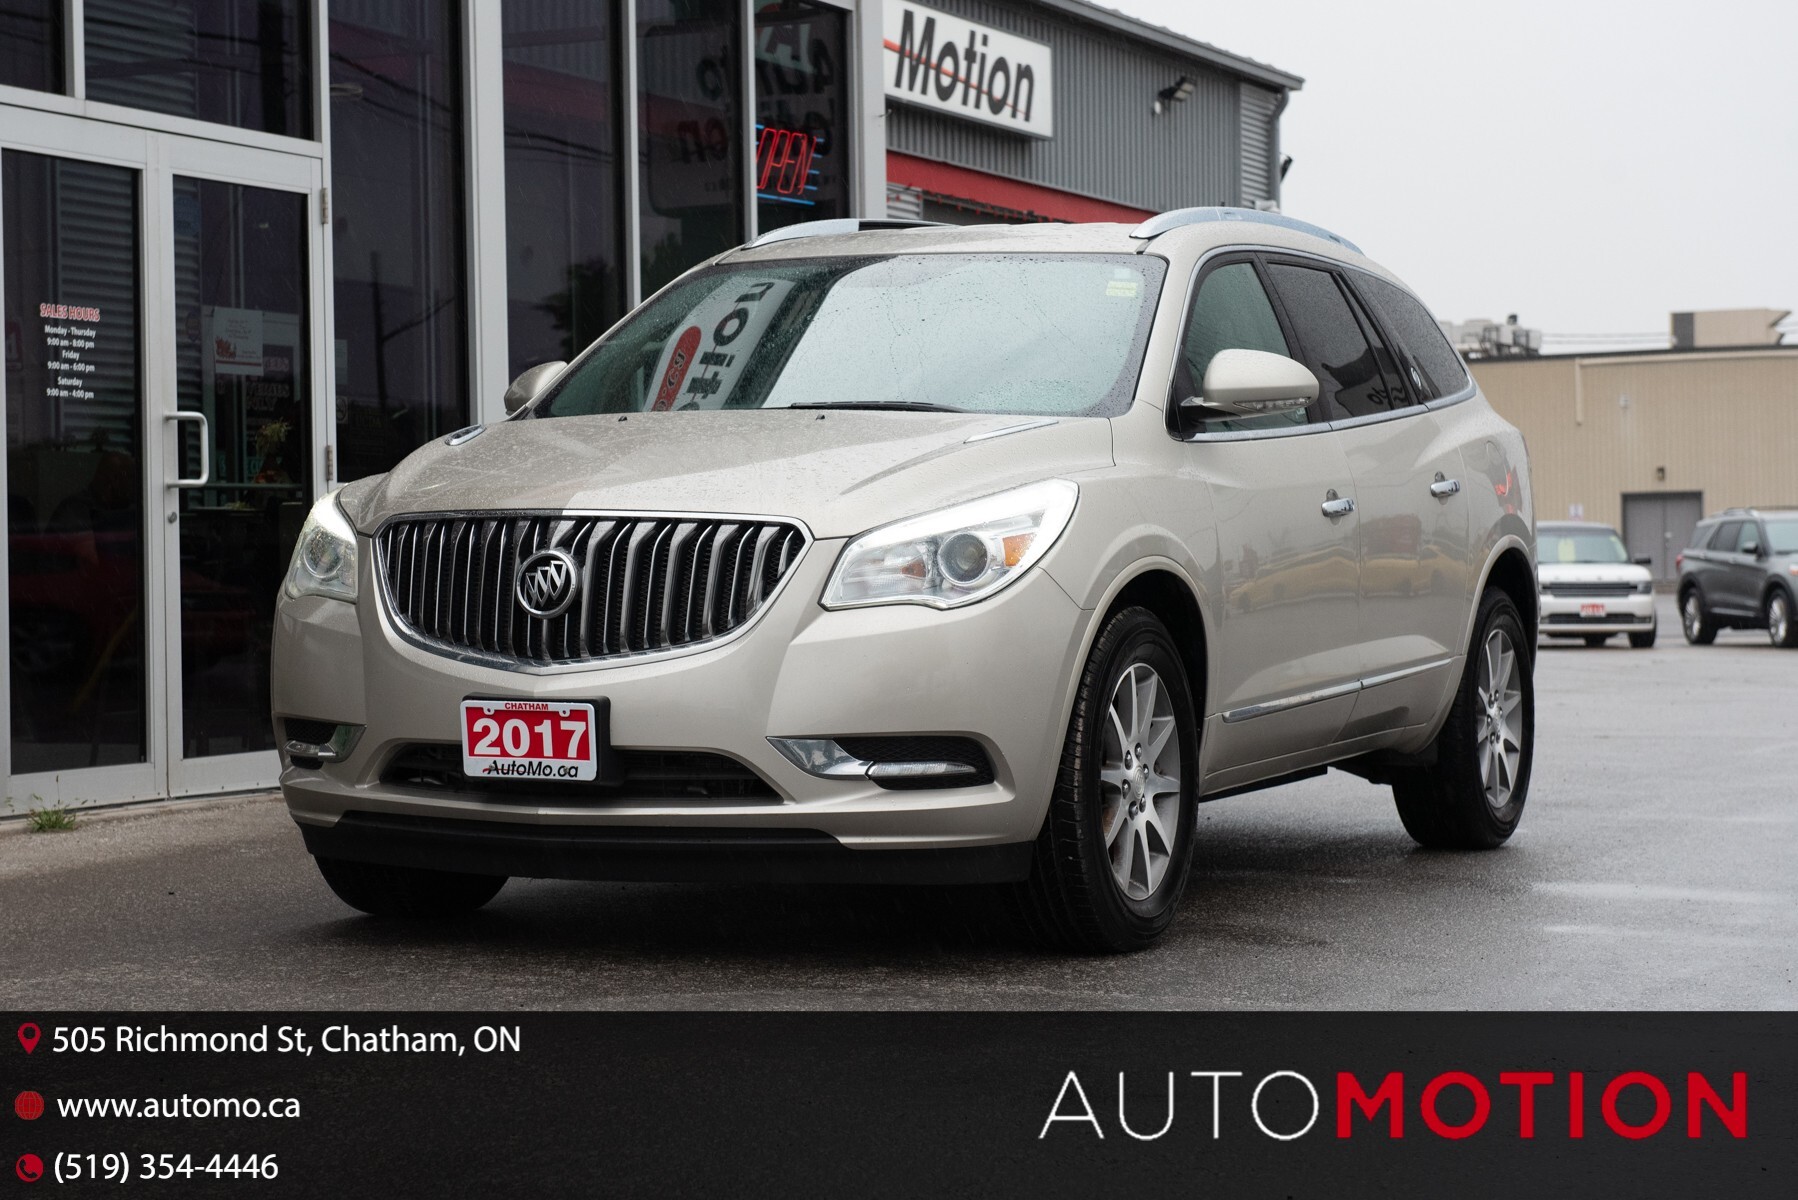 2017 Buick Enclave | AFFORDABLE |